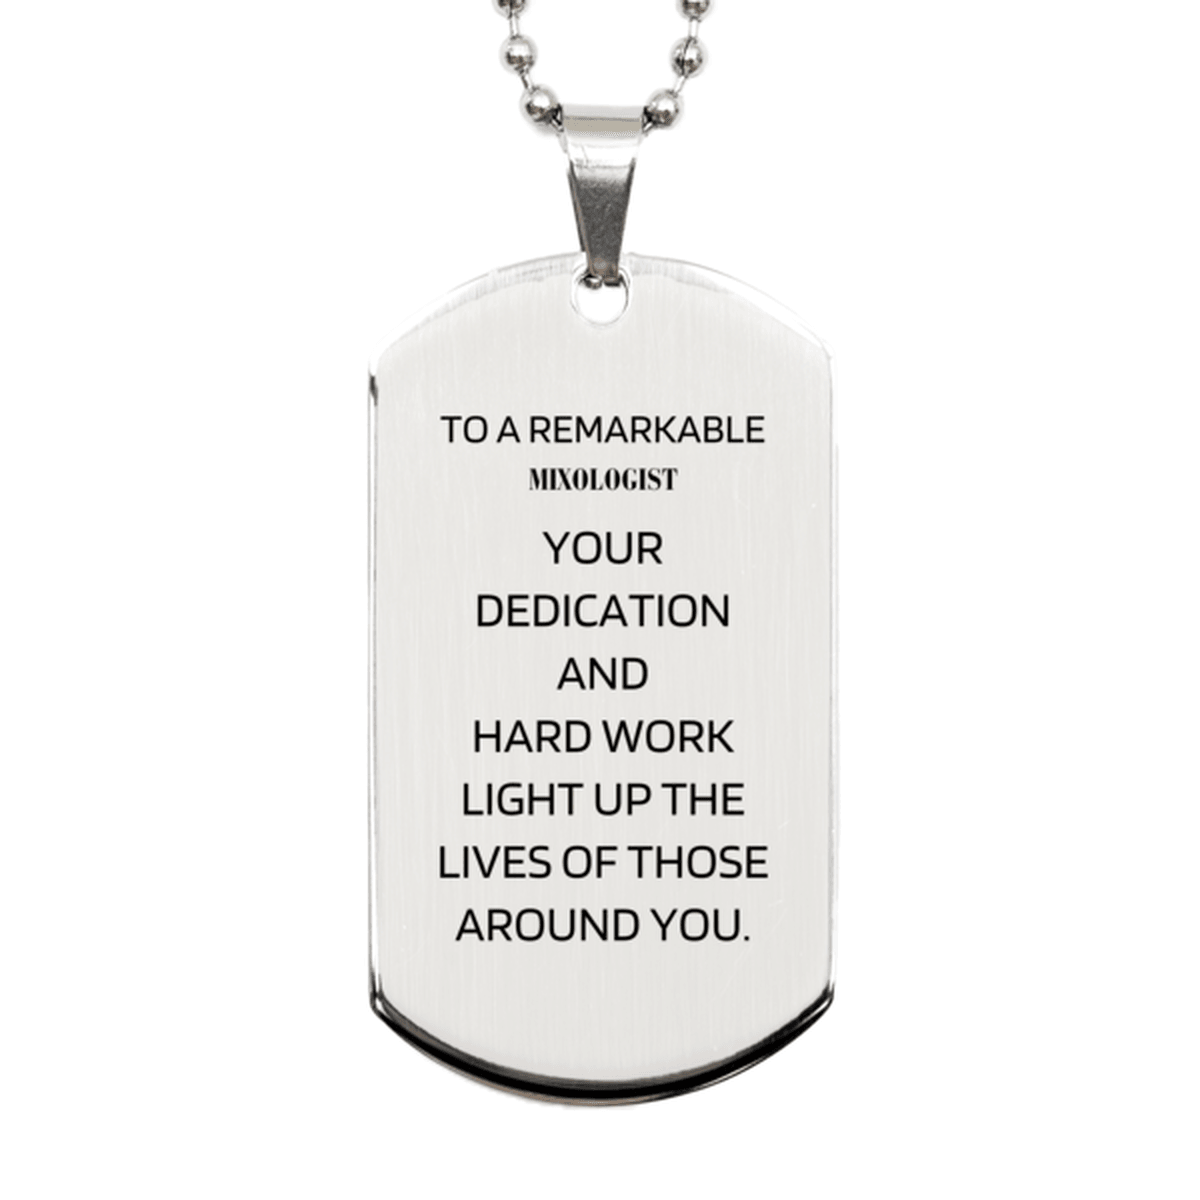 Remarkable Mixologist Gifts, Your dedication and hard work, Inspirational Birthday Christmas Unique Silver Dog Tag For Mixologist, Coworkers, Men, Women, Friends - Mallard Moon Gift Shop